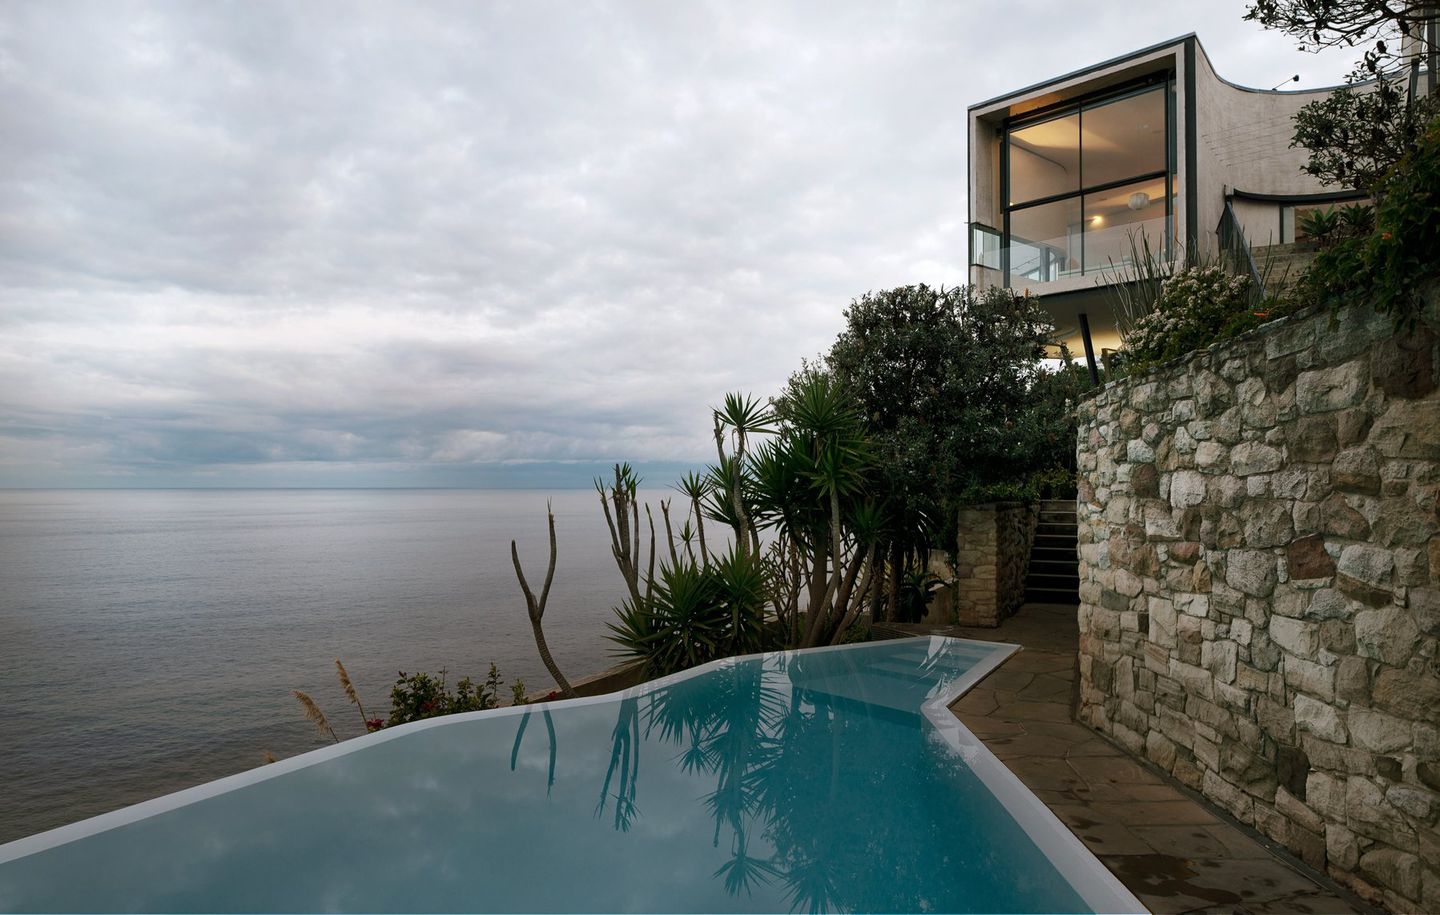 View of infinity pool above a cliff looking out to the ocean at cliff house at Dover Heights Sydney designed by Durbach Block Jaggers Architects